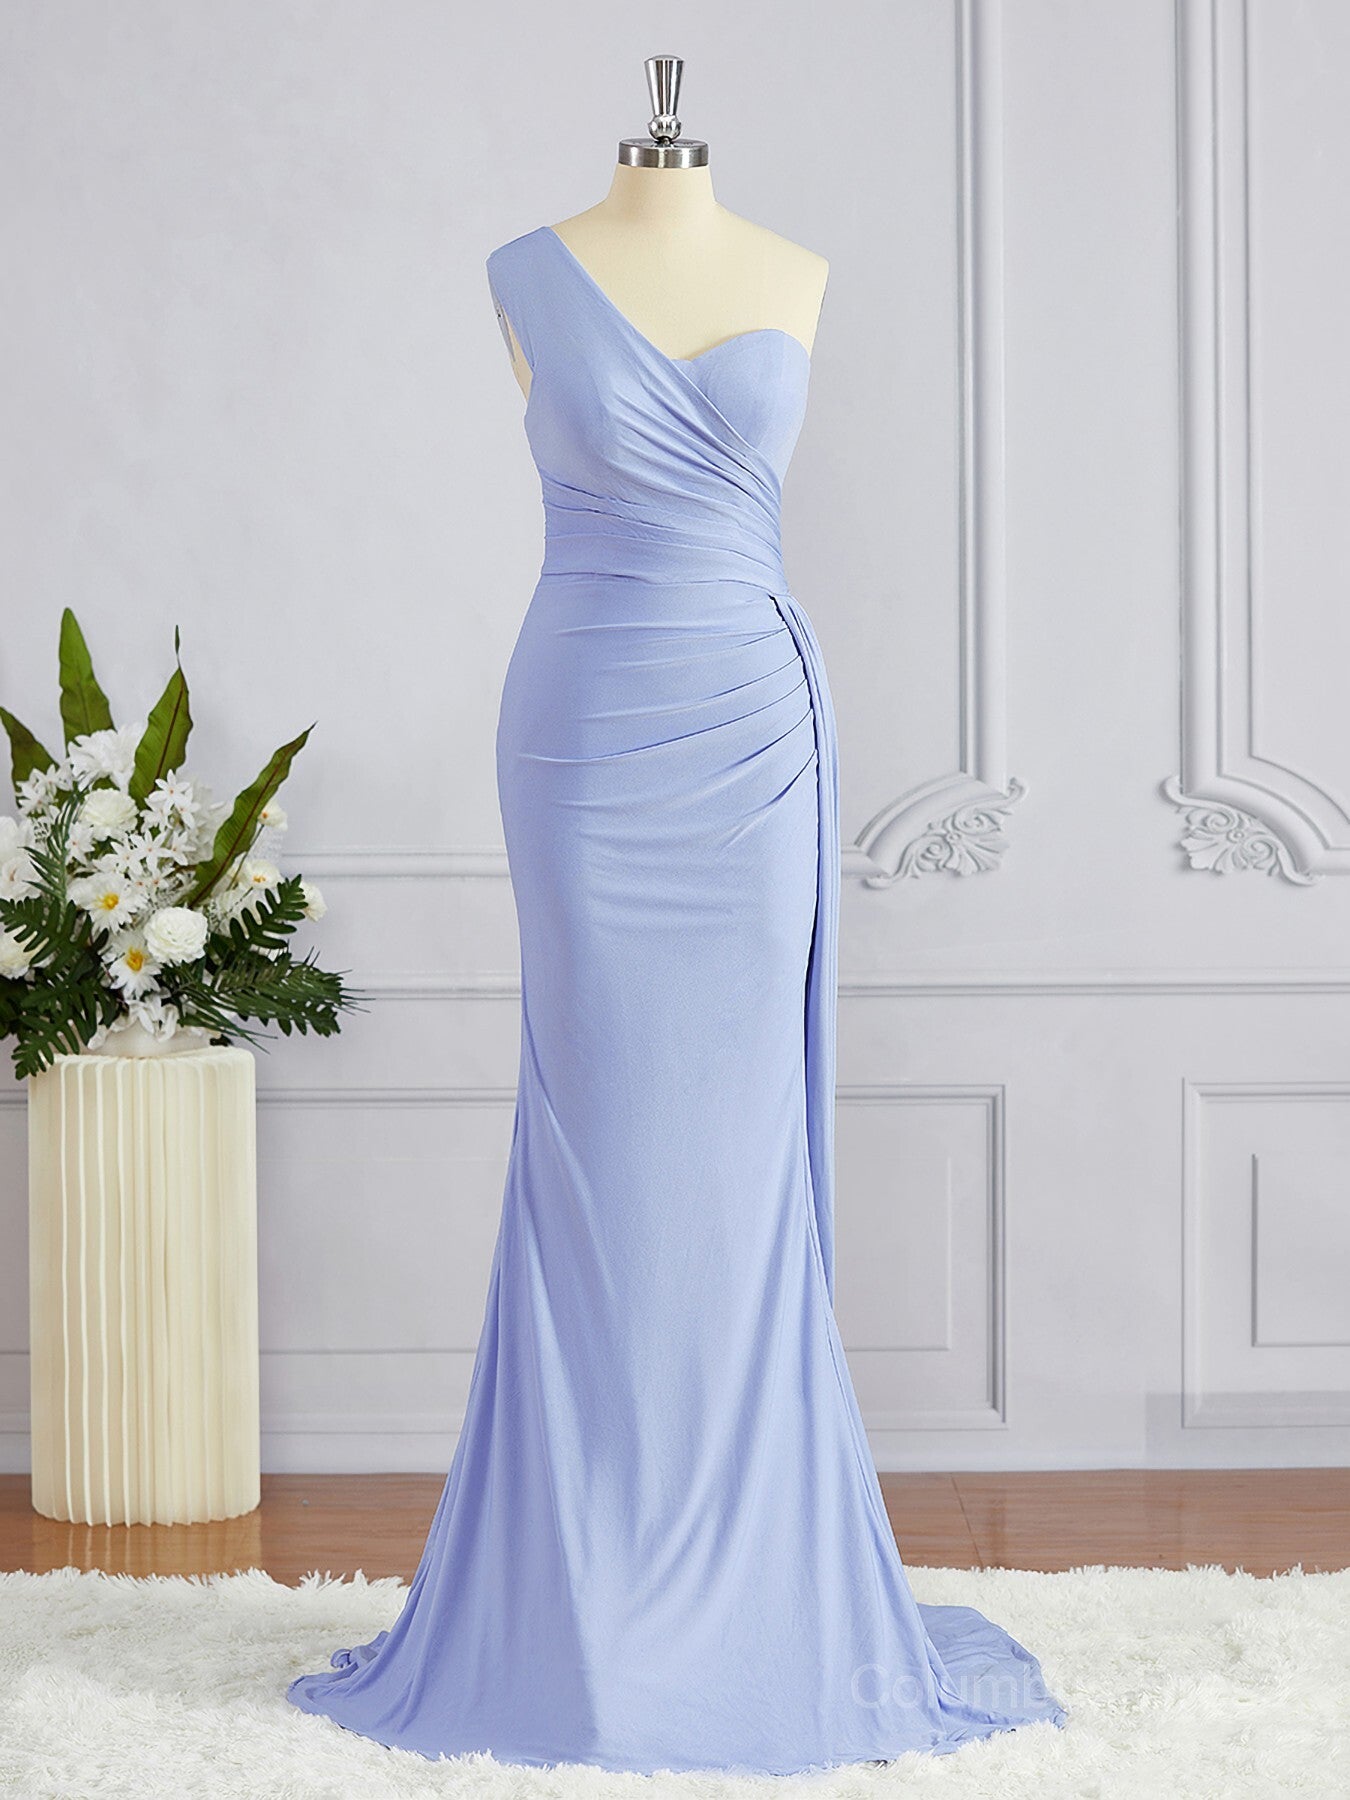 Sheath/Column One-Shoulder Sweep Train Jersey Corset Bridesmaid Dresses outfit, Prom Dress Classy